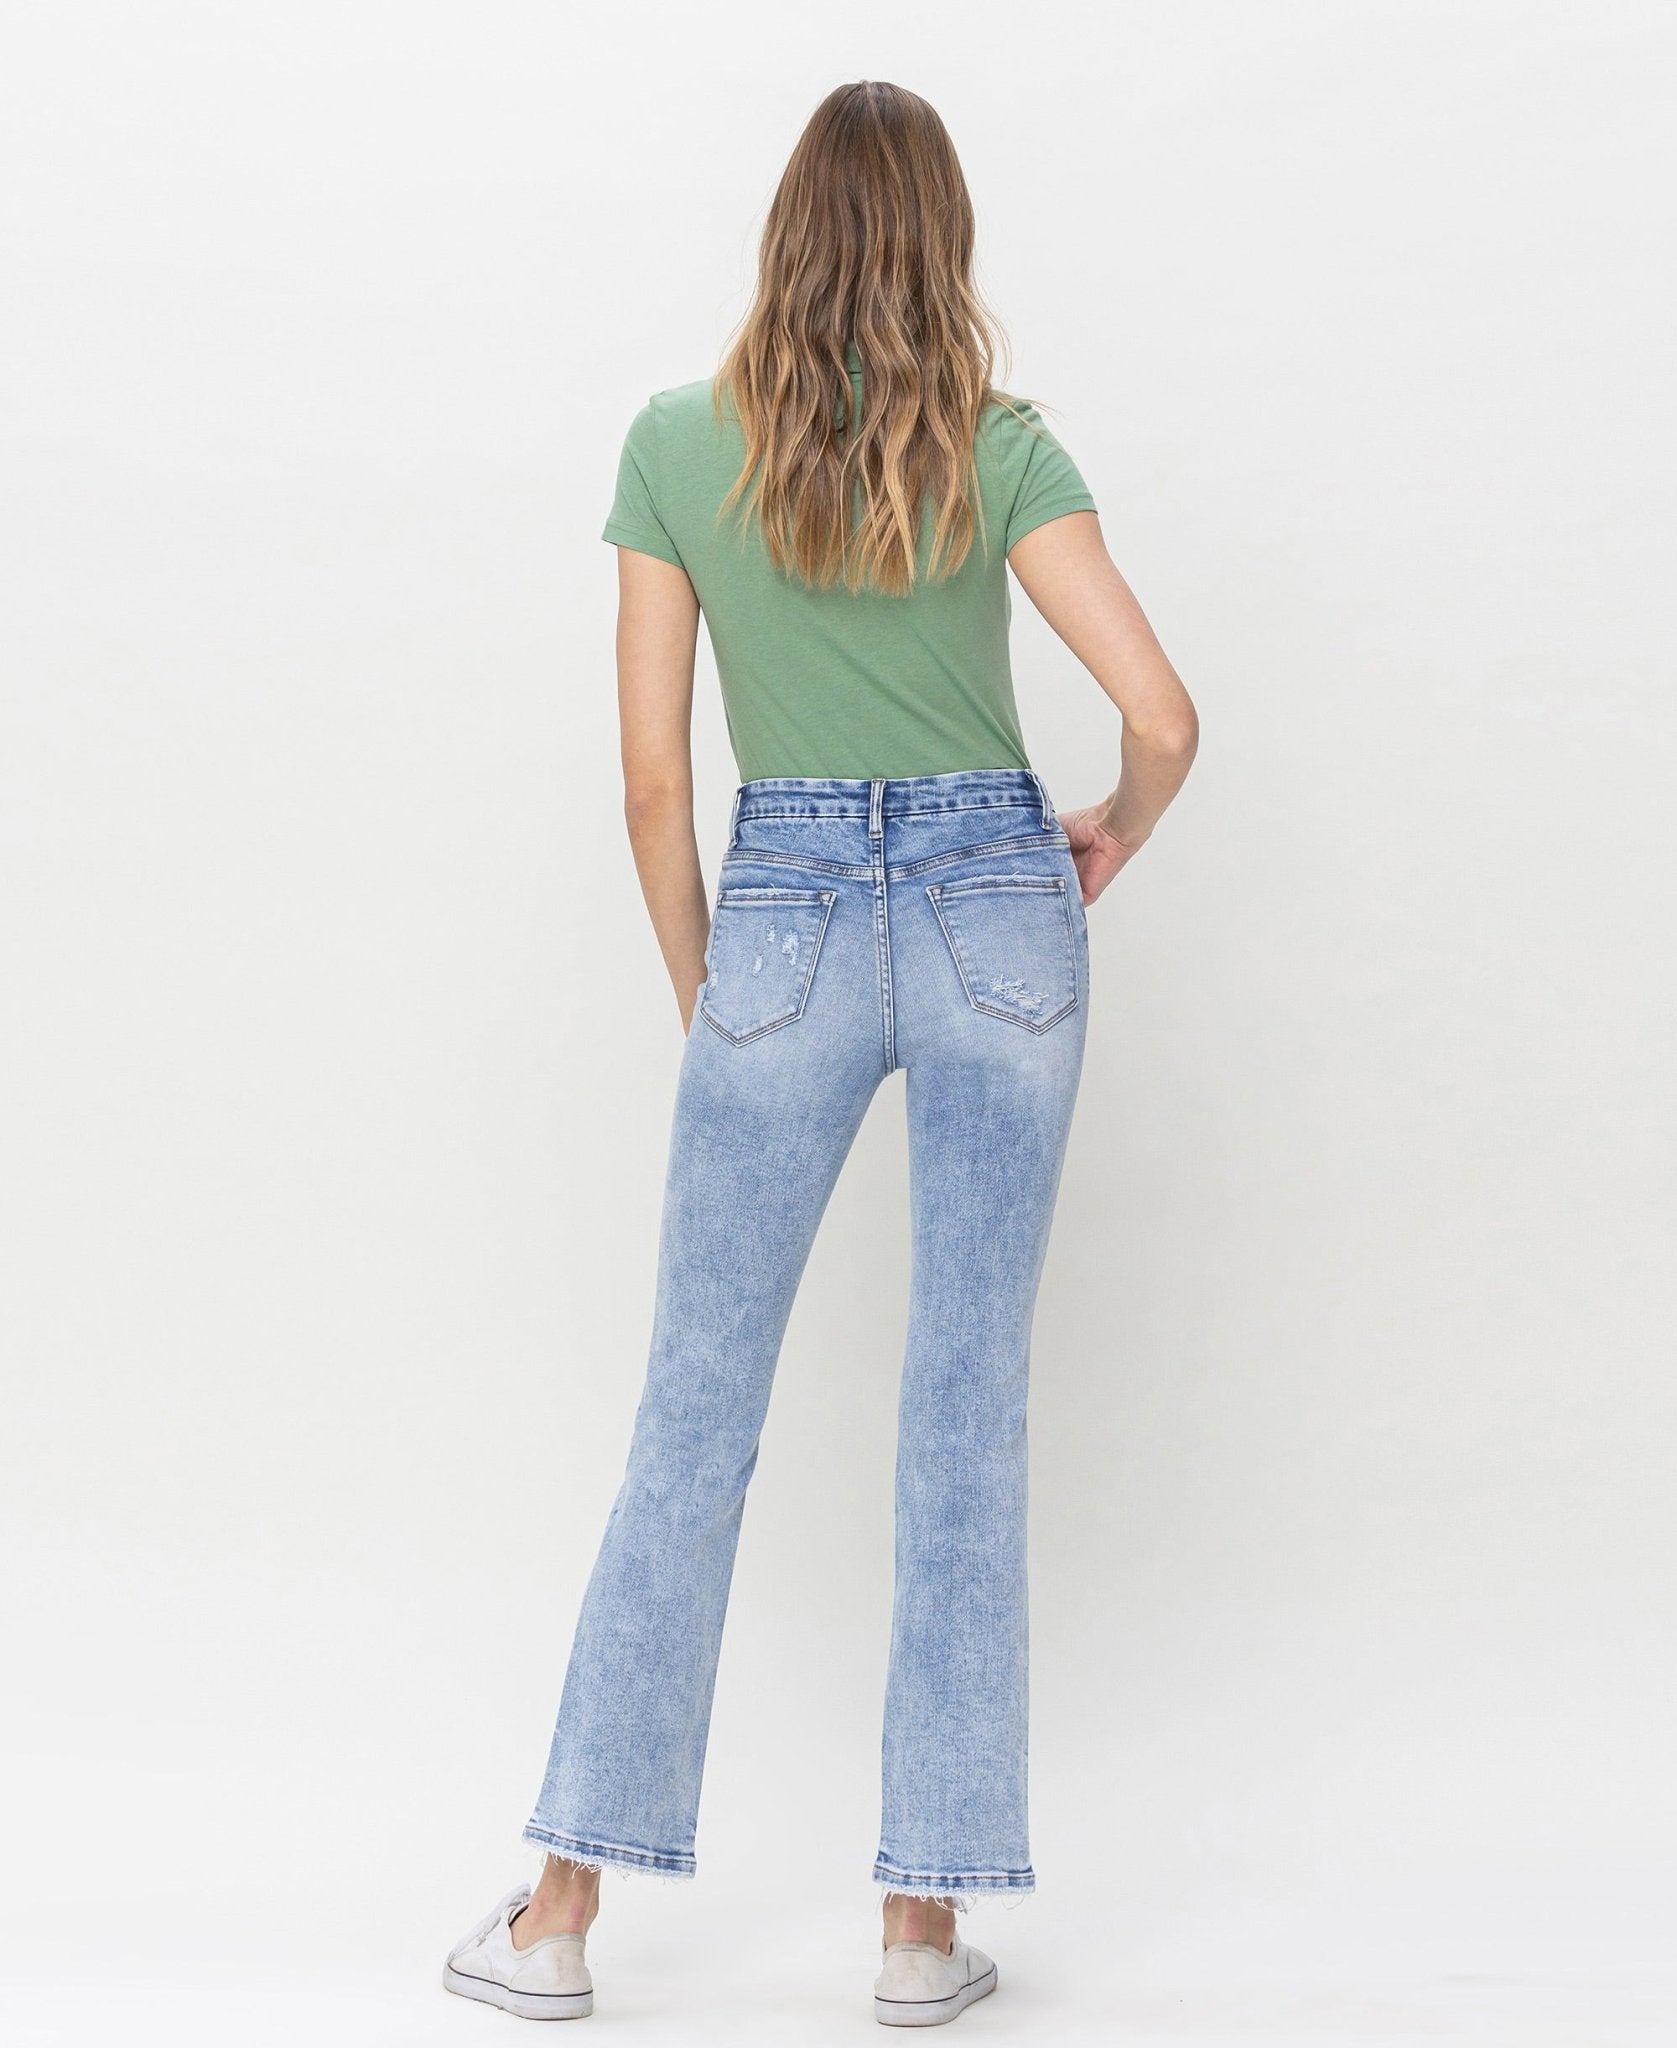 Fashionably High Rise Bootcut Jean - Lavender Hills BeautyVervet by Flying Monkey